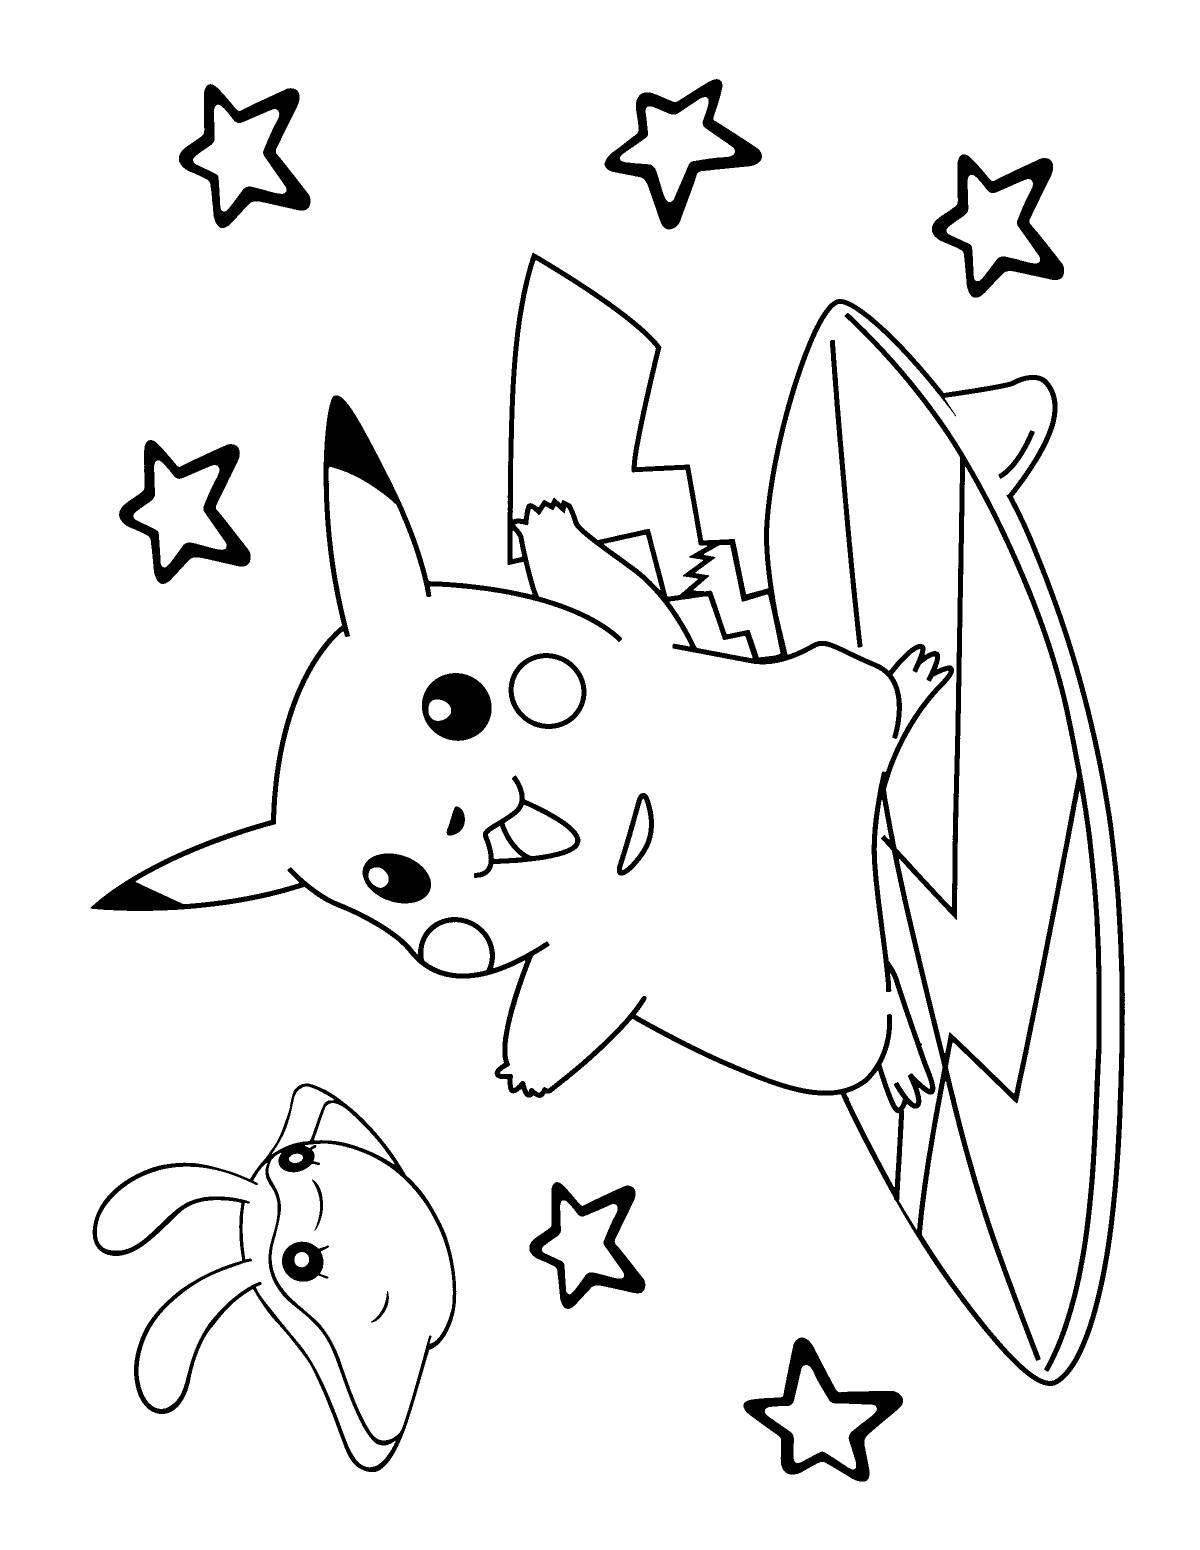 Joyful pikachu coloring pages for kids